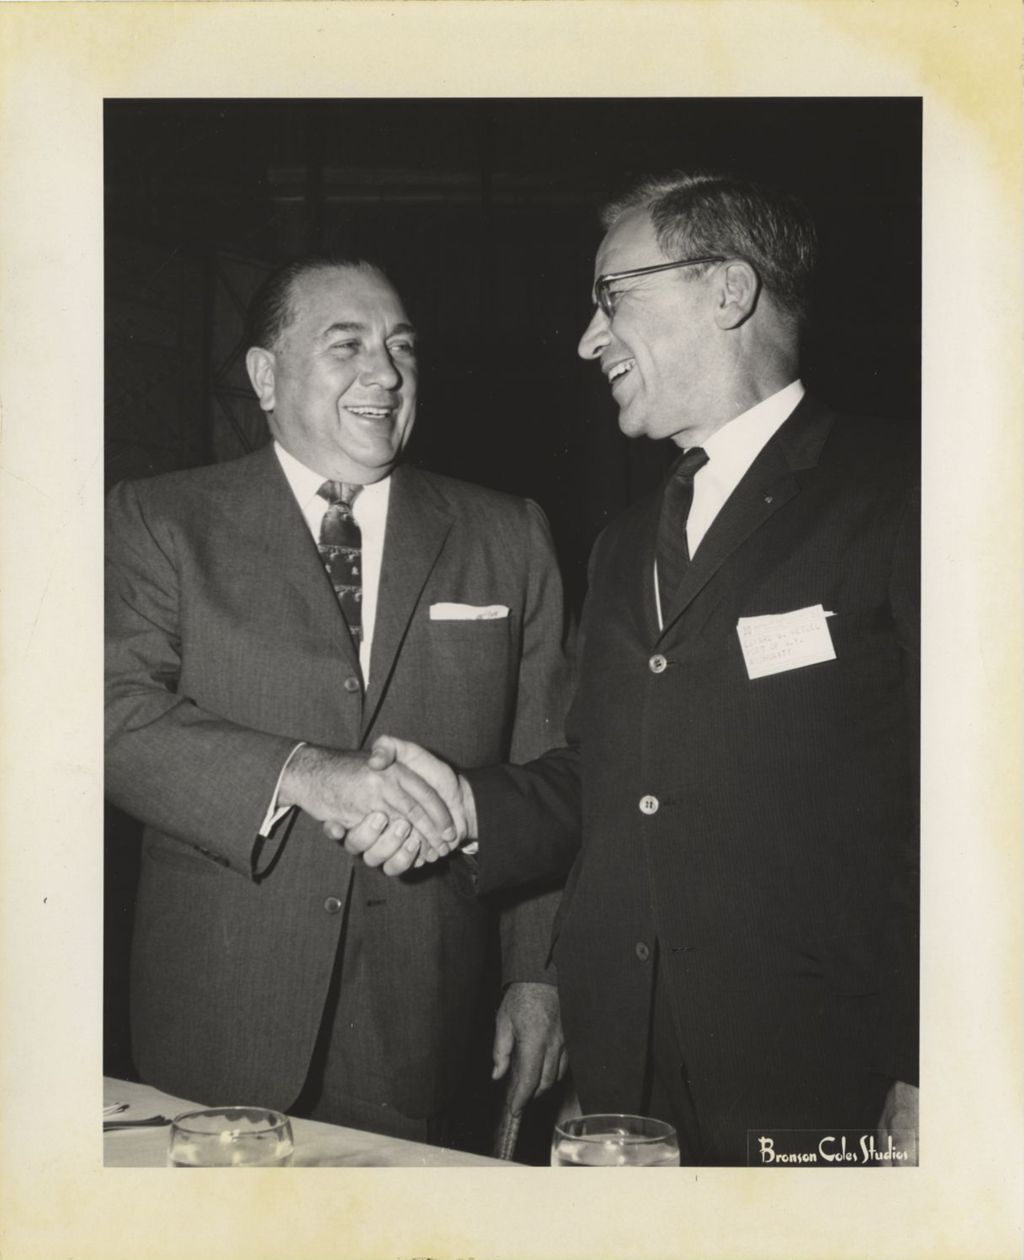 Richard J. Daley with the President of the Institute of Traffic Engineers